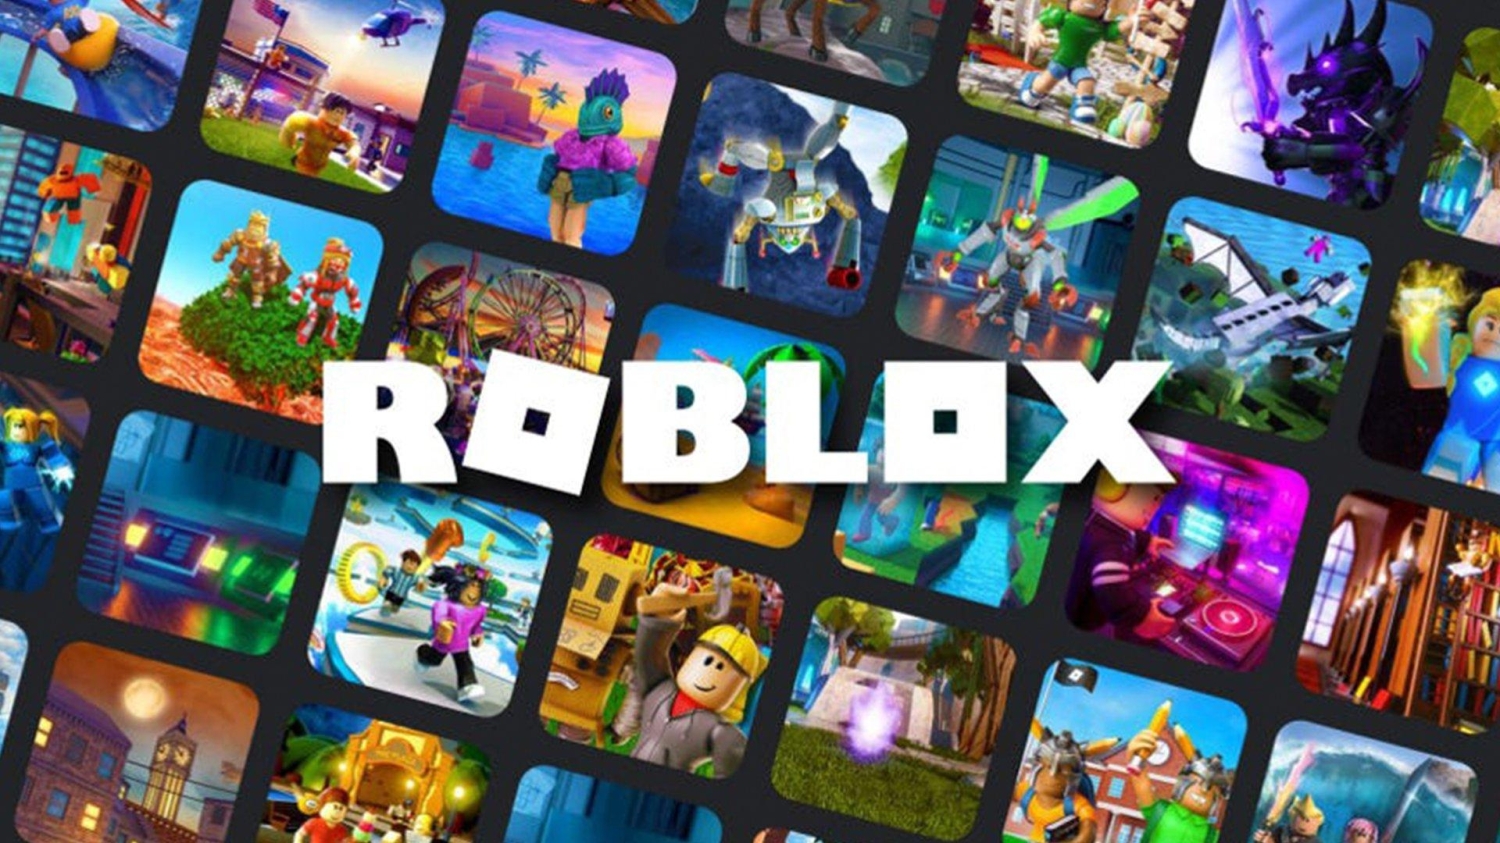 93220 0254 Roblox Is Finally Coming To Basically The Only Platform It Isnt On Full 